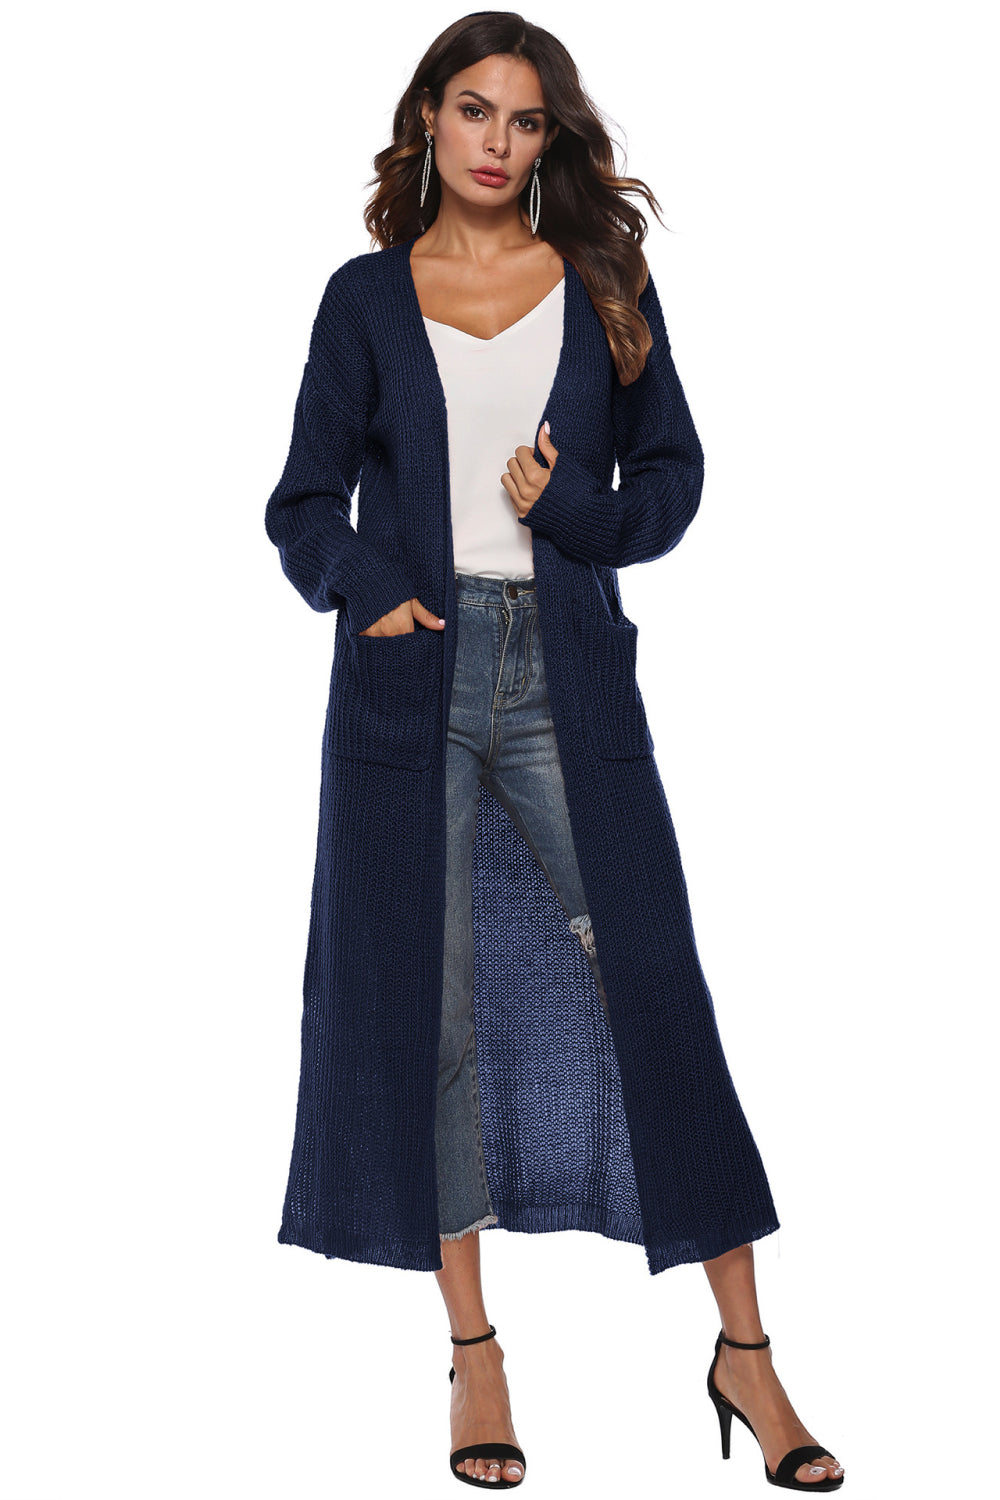 Long Sleeve Open Front Buttoned Cardigan - Dark Blue / S - Women’s Clothing & Accessories - Shirts & Tops - 28 - 2024